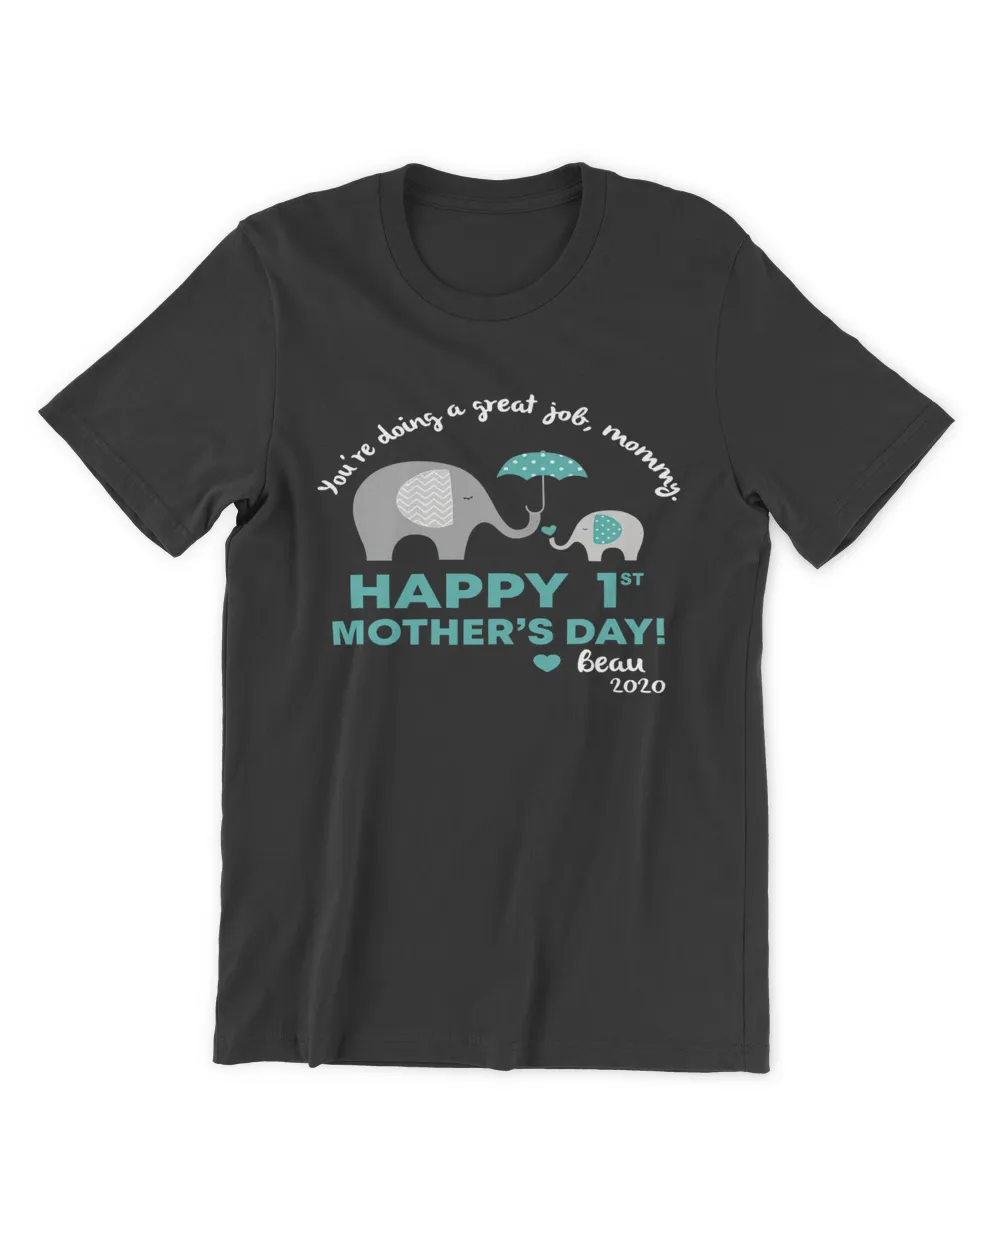 Personalized Baby Onesie - Happy 1 st Mother’s Day Shirt